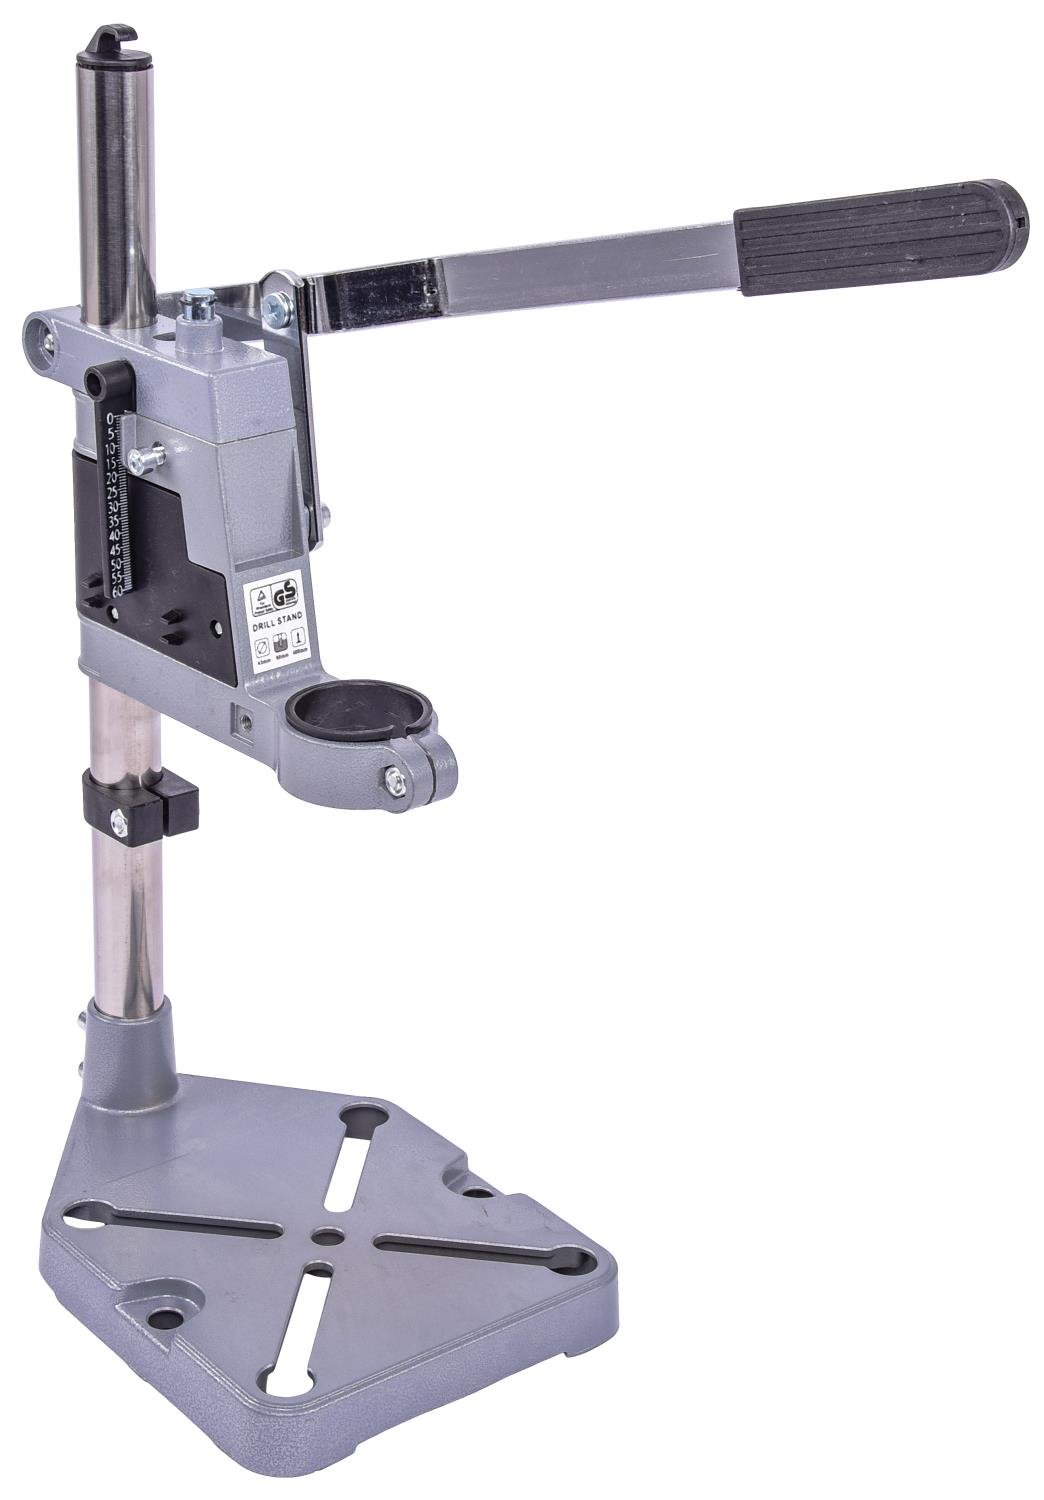 Drill Press Stand for Hand Drills [60 mm (2 1/4 in.) Depth Range]